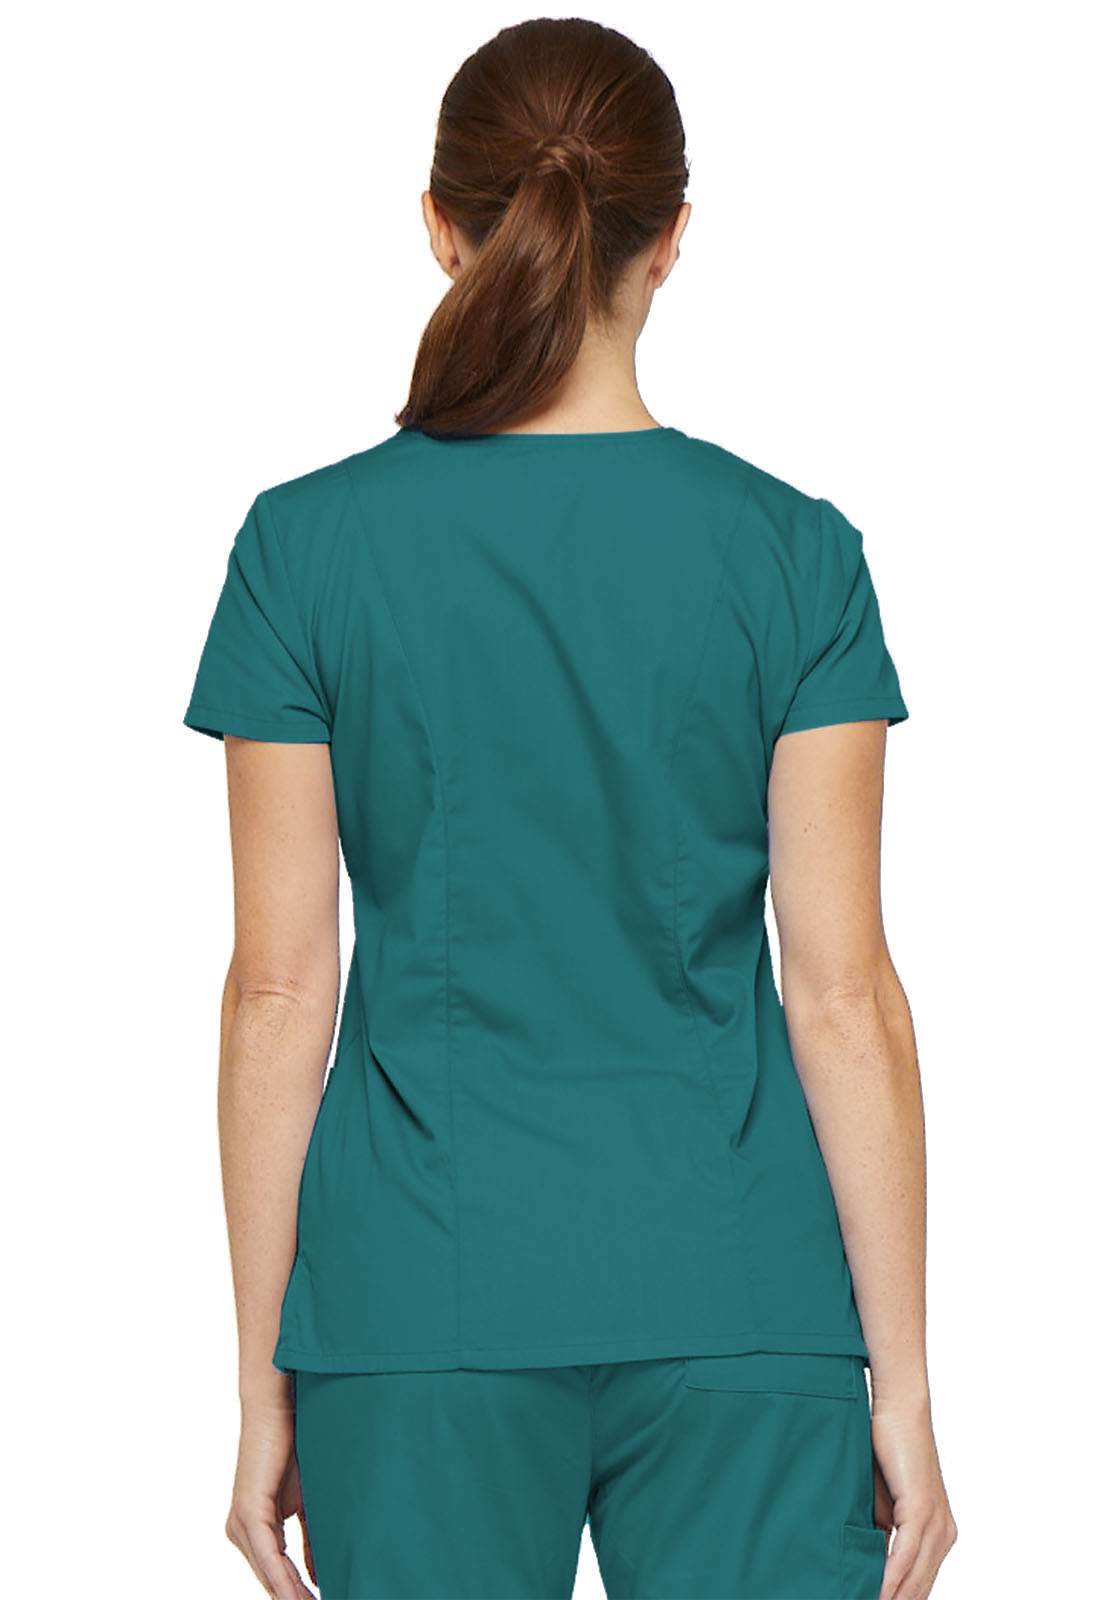 EDS Signature V-Neck Top in Teal Blue 85906-TLWZ from Uniforms Express